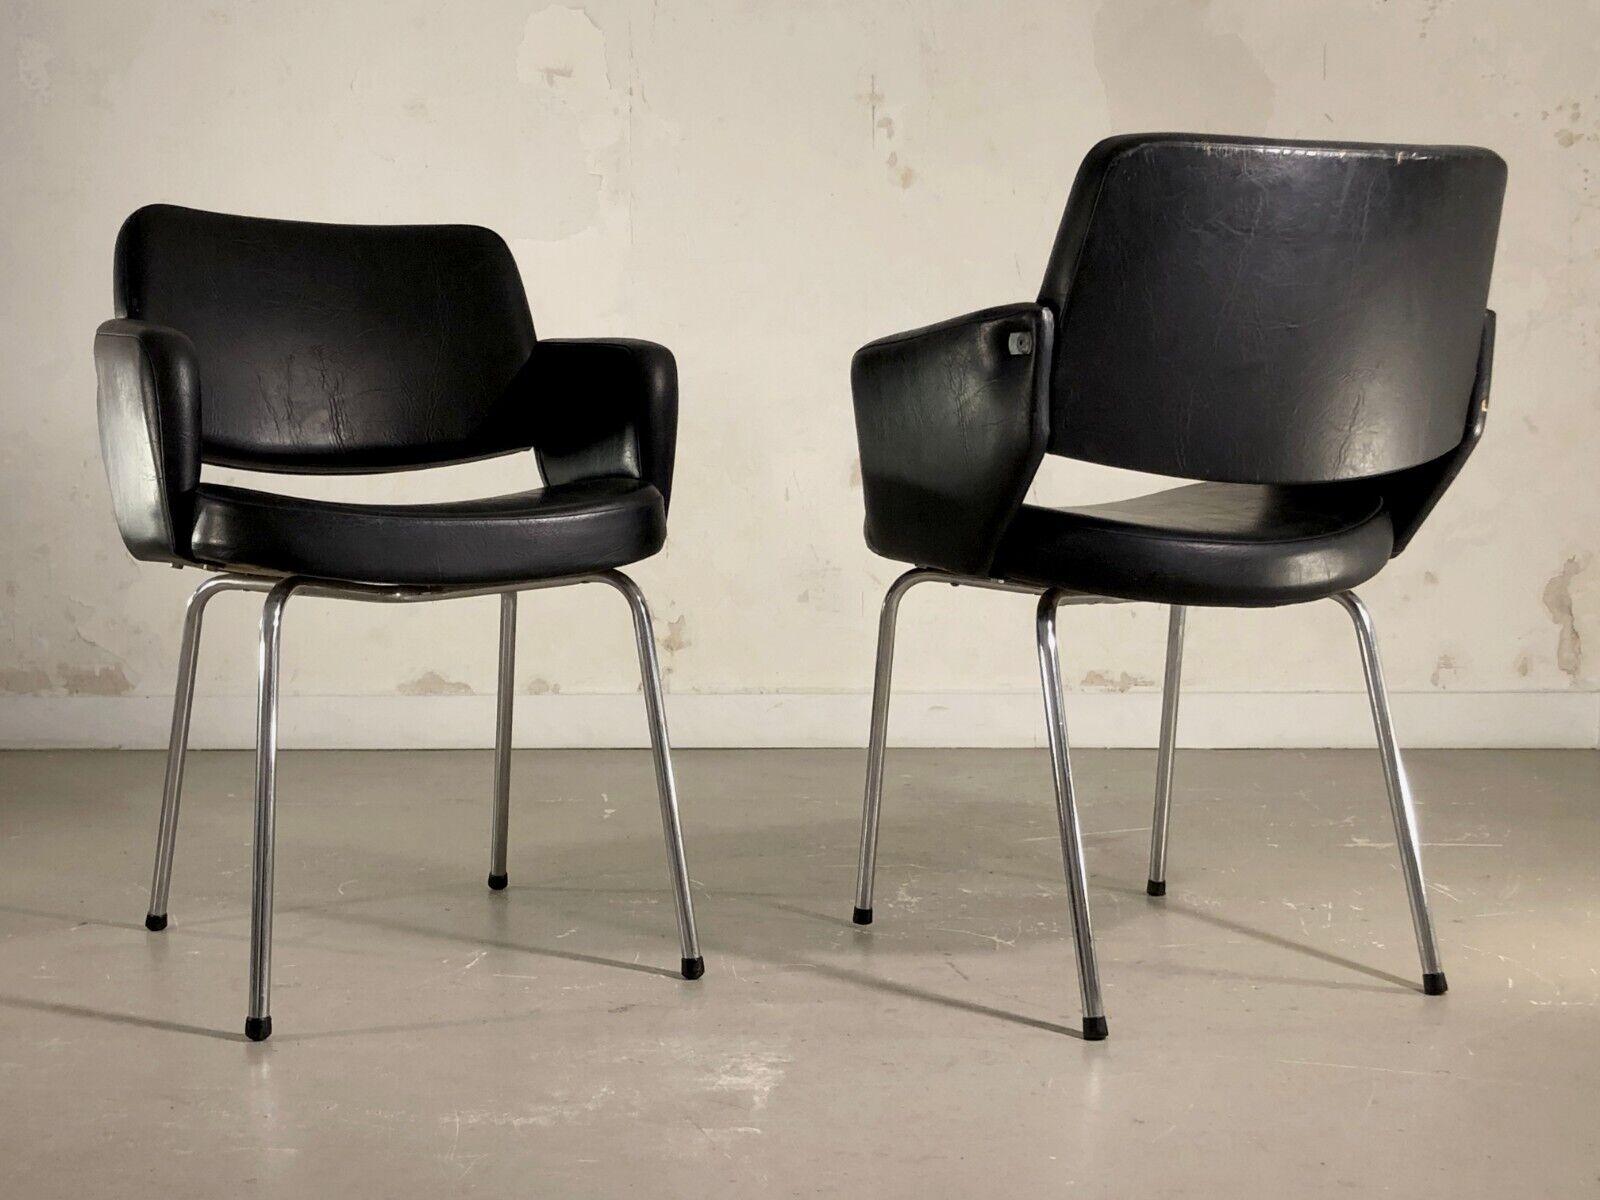 A Pair of MID-CENTURY-MODERN CHAIRS in ARP / MOTTE / GUARICHE Style, France 1950 For Sale 8